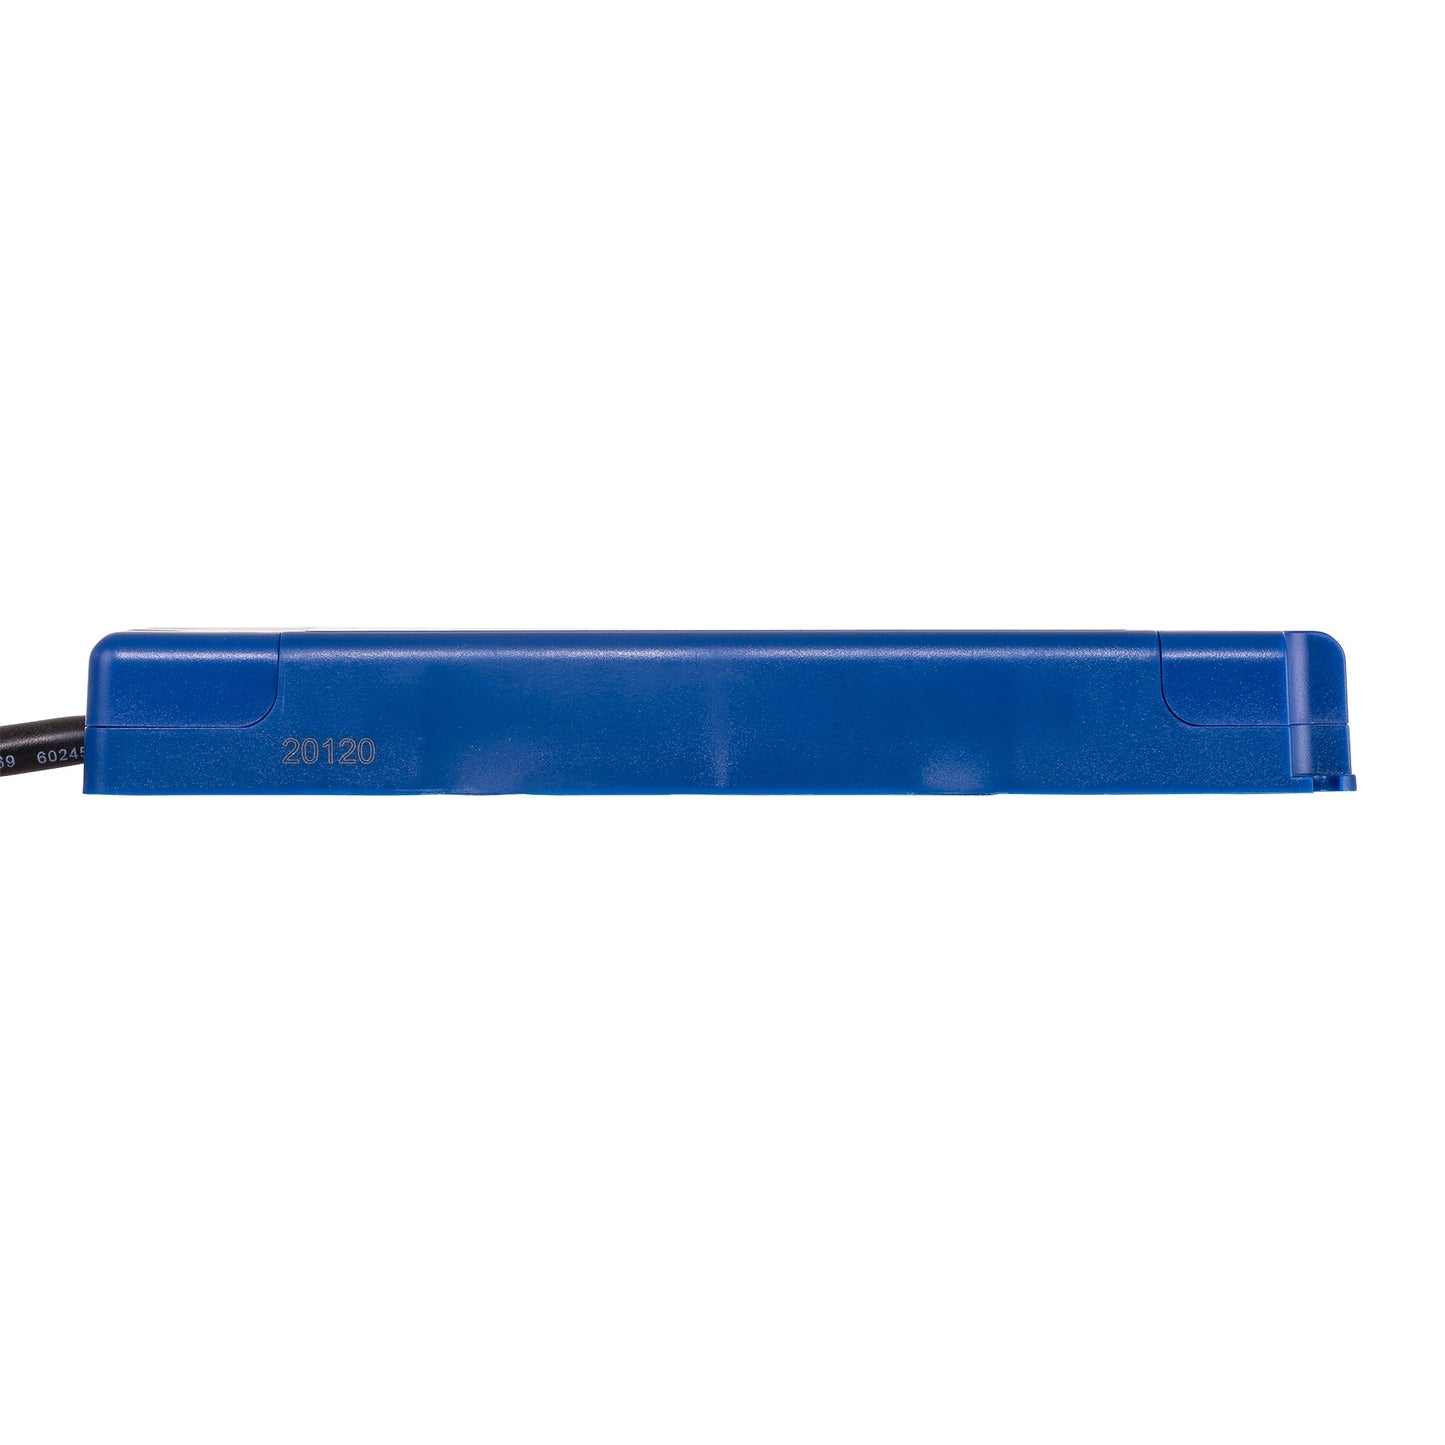 Hv9660-30w - 30w Indoor Dimmable LED Driver